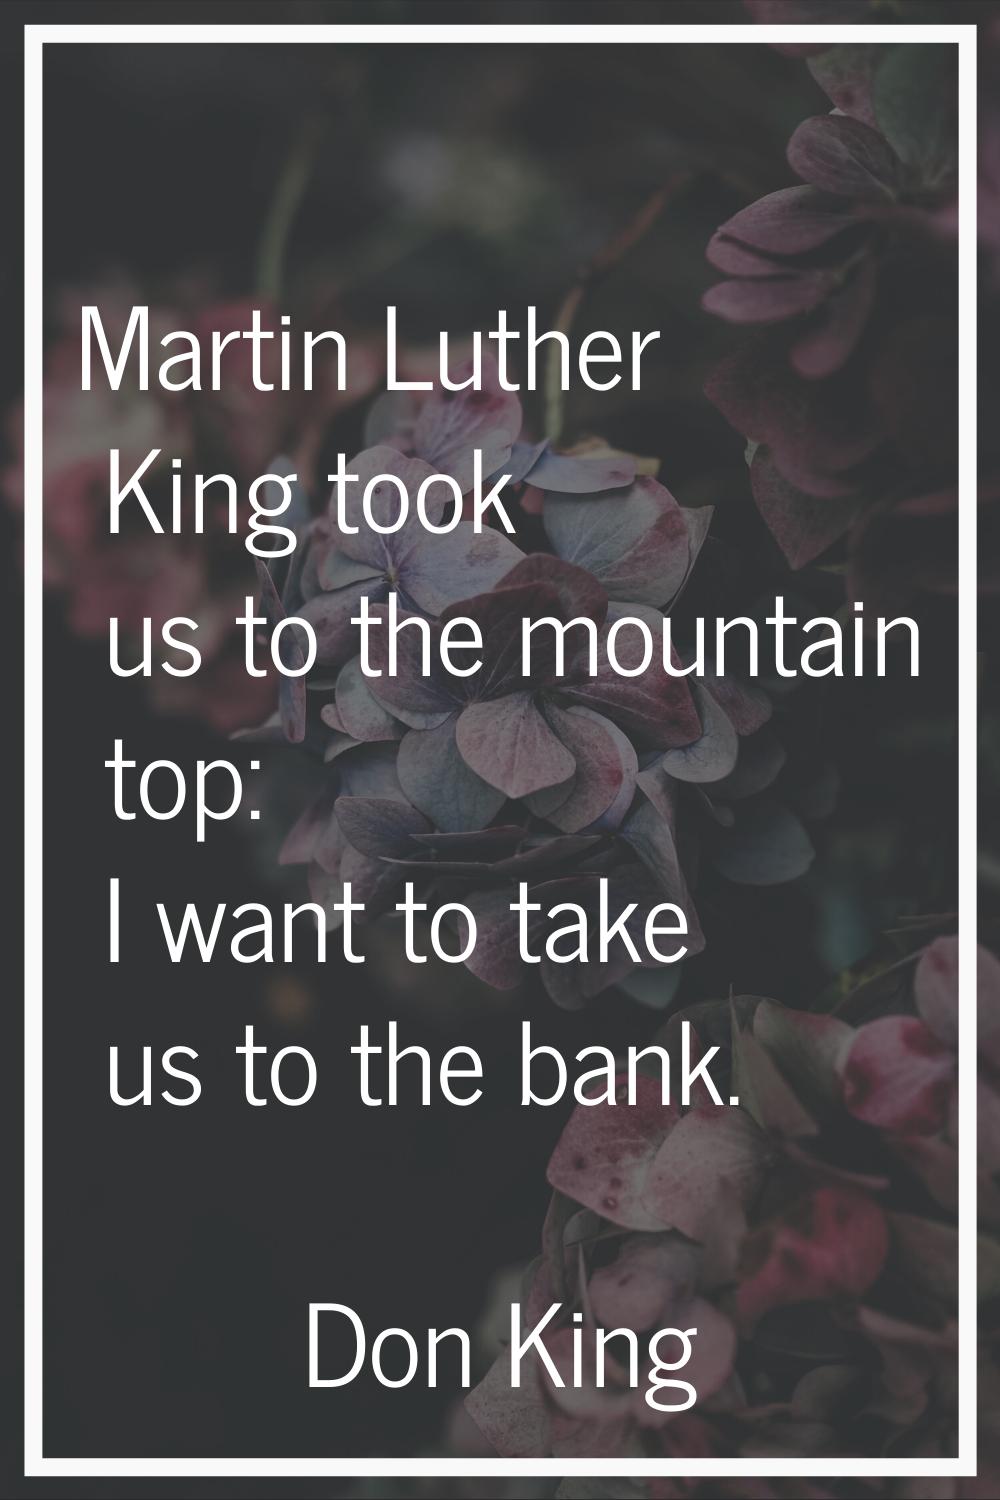 Martin Luther King took us to the mountain top: I want to take us to the bank.